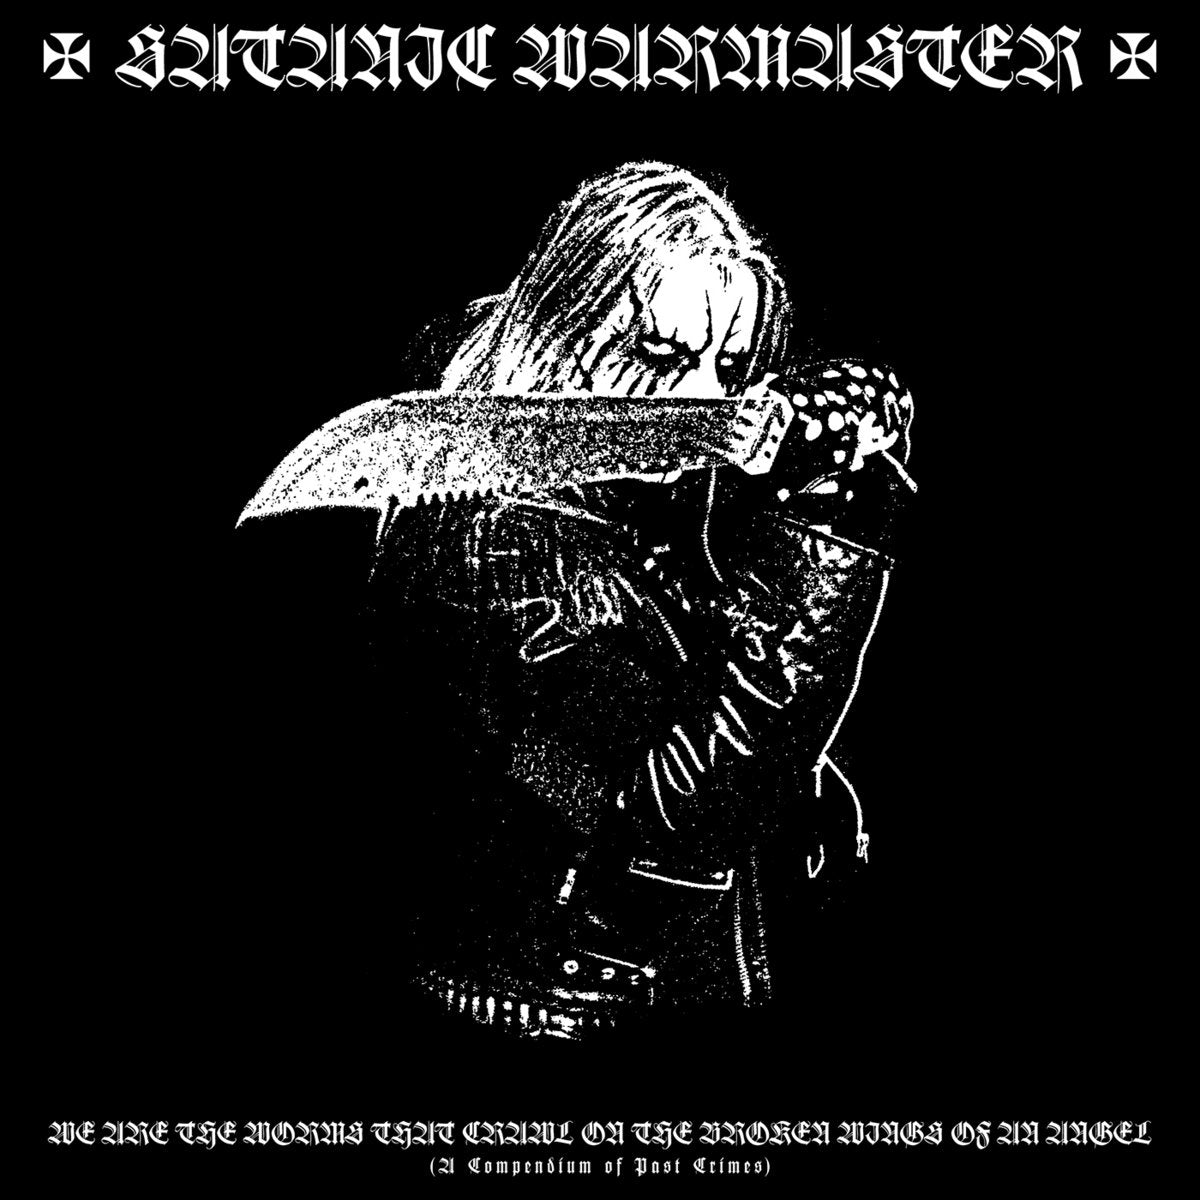 Satanic Warmaster - We Are the Worms That Crawl on the Broken Wings of an Angel (A Compendium of Past Crimes) 2 CD